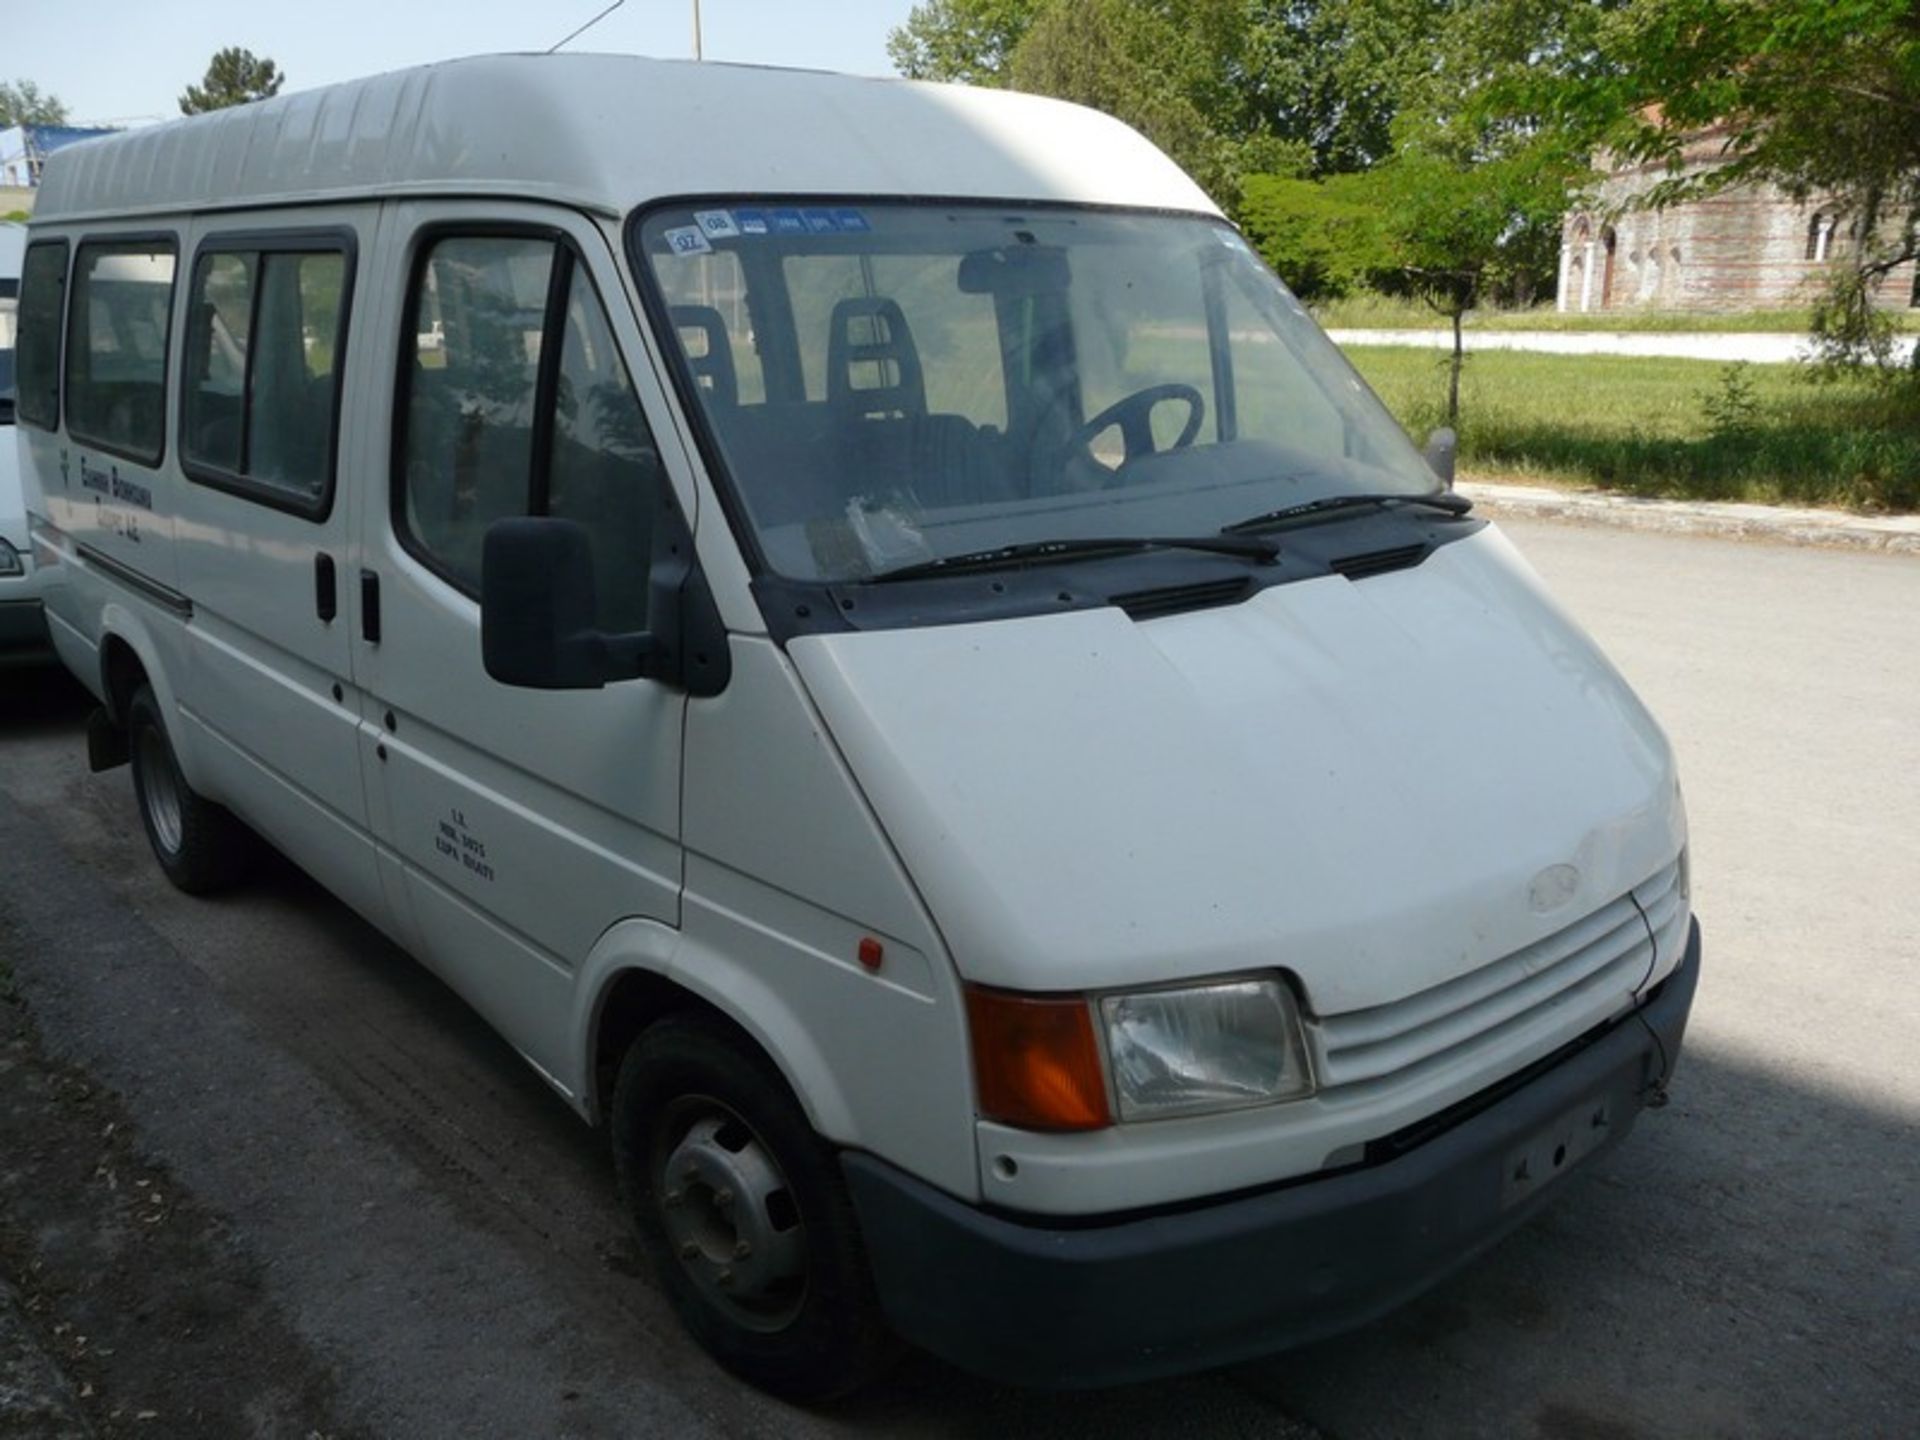 FORD TRANSIT, bus115, diesel, KM 212503, 14+1 seats, REG NBB 8161, Year: 1991 (Located in Greece - - Image 4 of 10